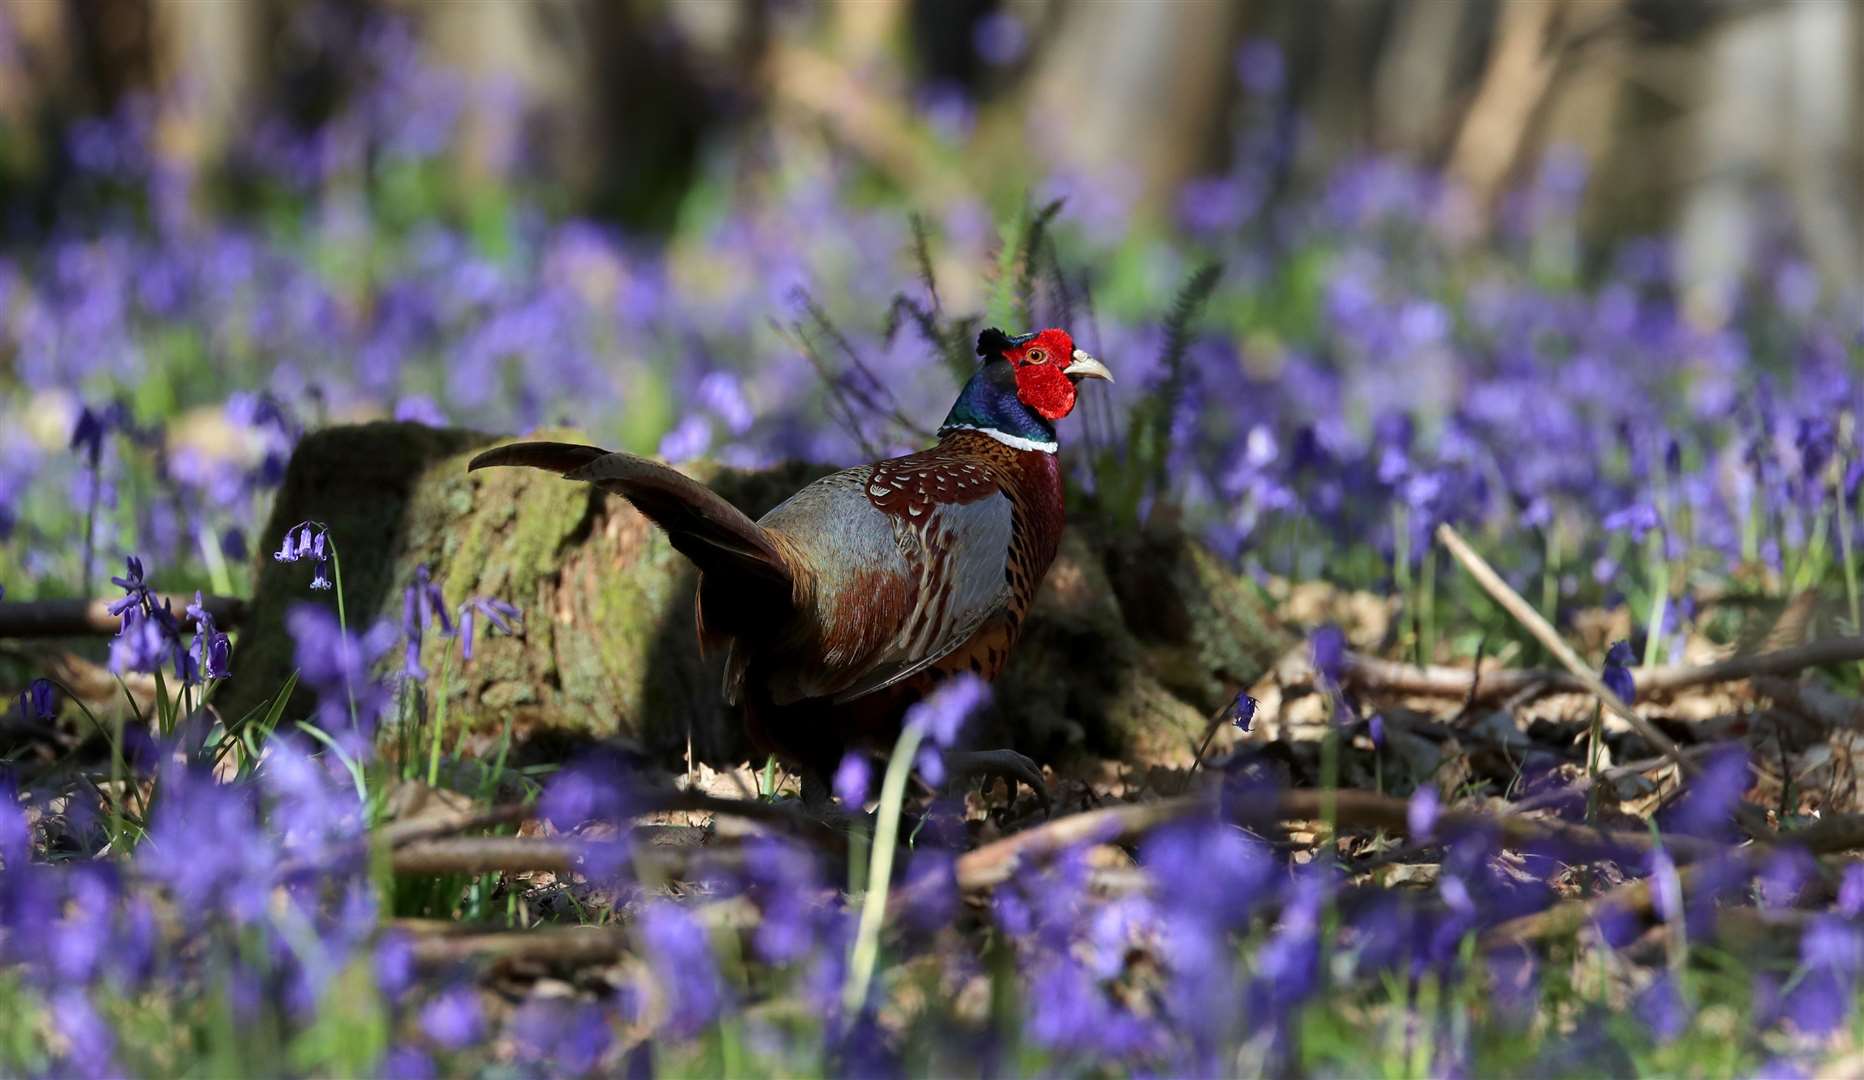 One case which led to a dispute involved a delay due to a train hitting a pheasant (Gareth Fuller/PA)